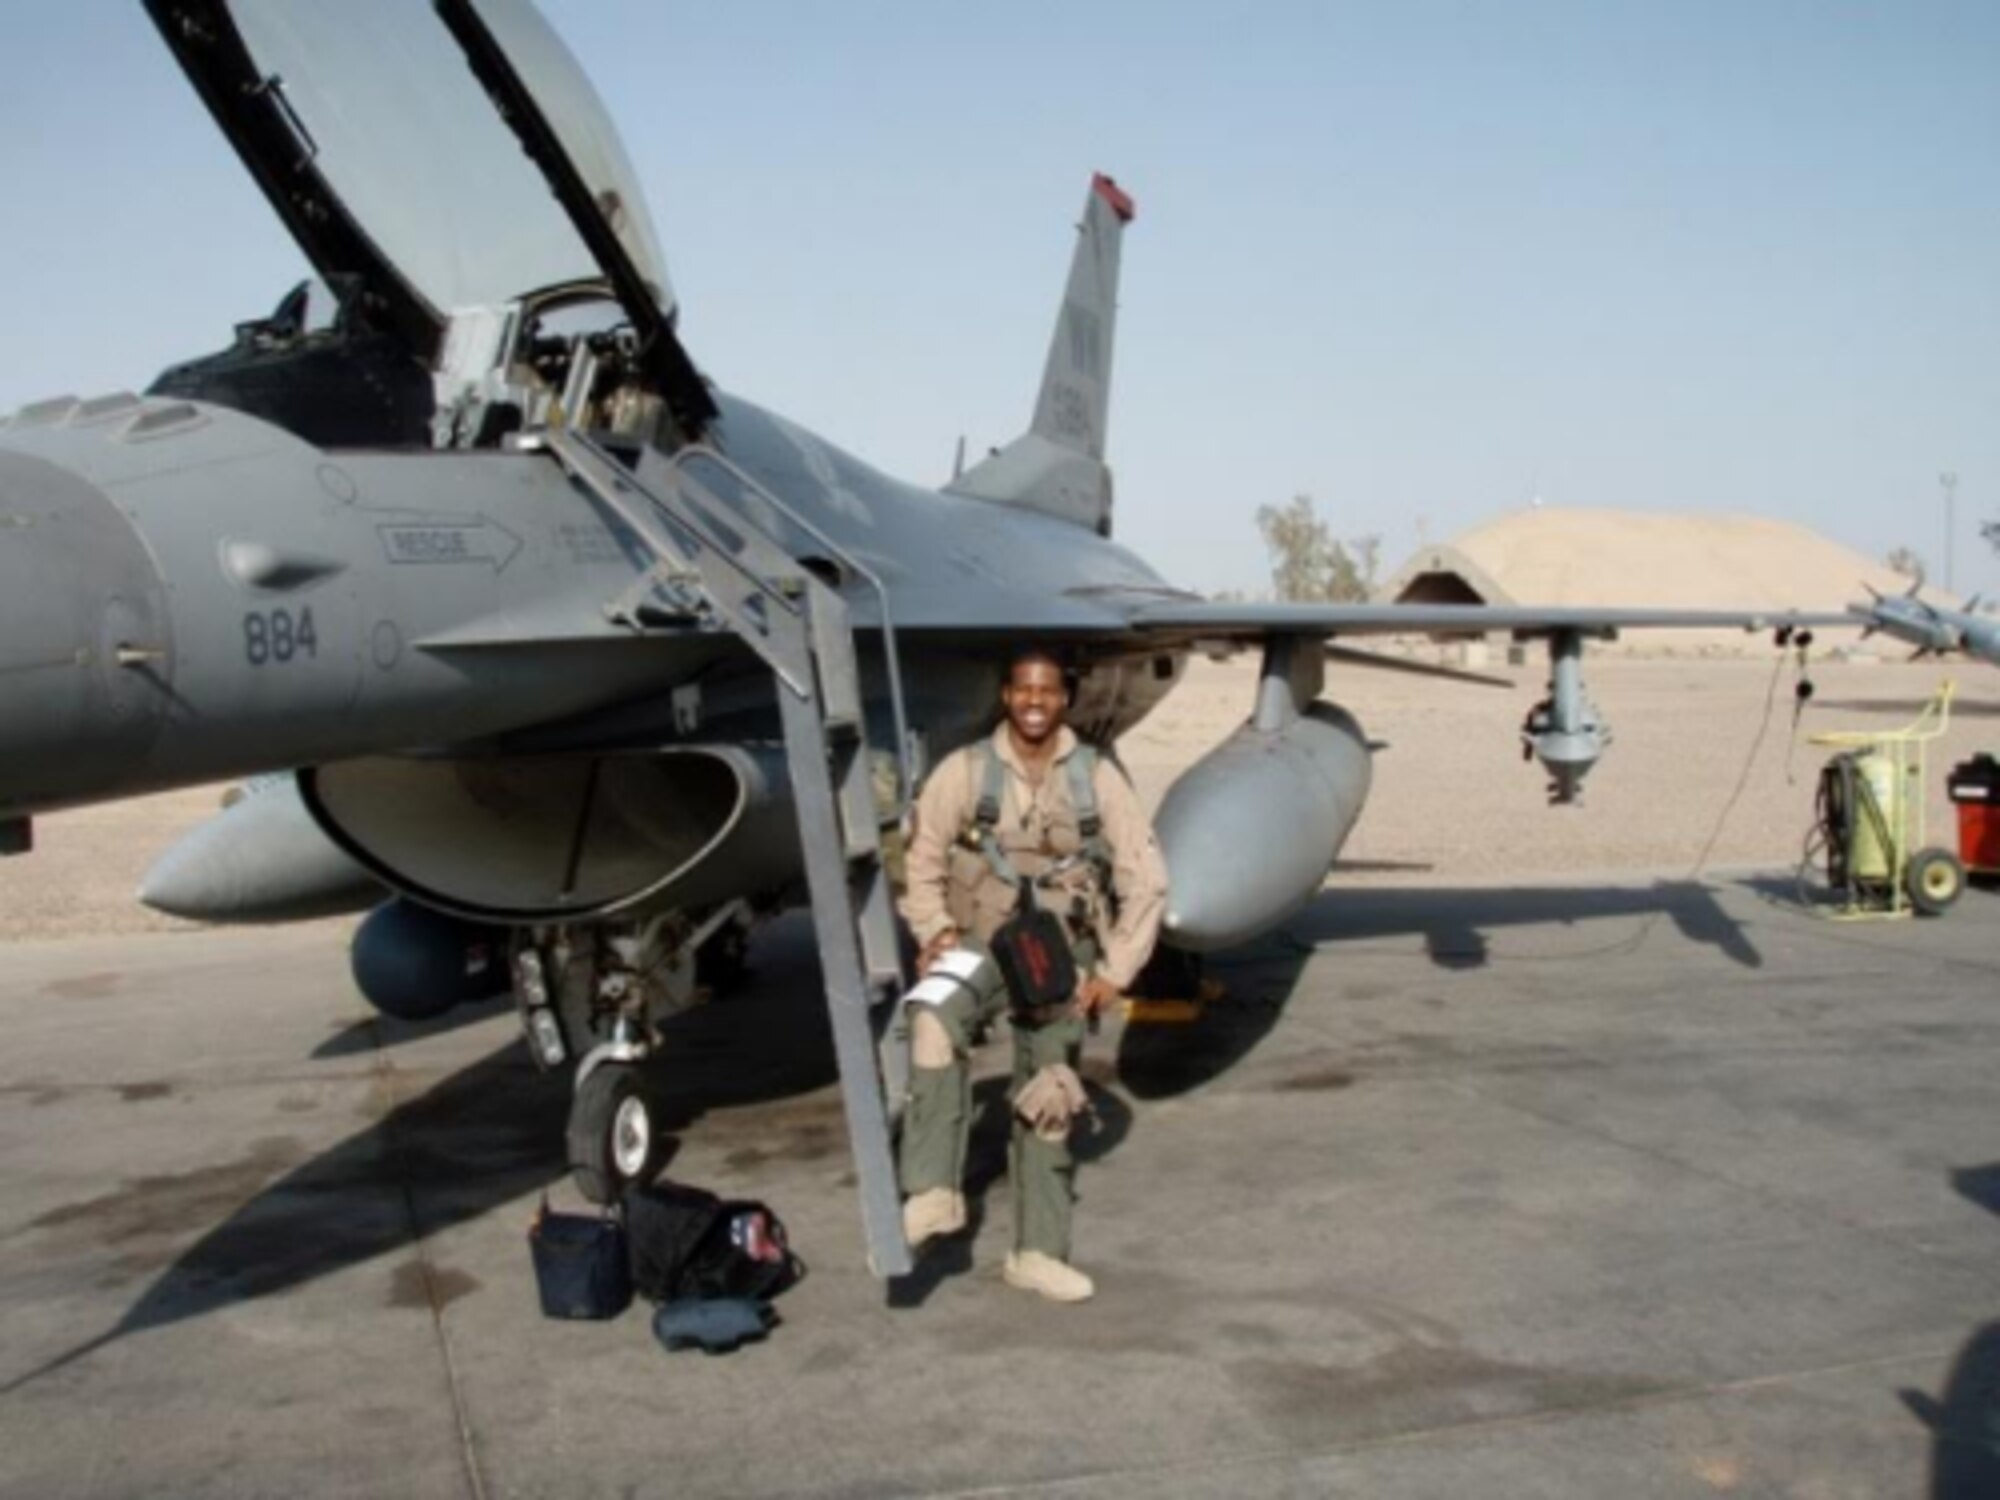 Maj. Kenyatta Ruffin, an F-16 pilot now attending professional development at Ft. Leavenworth, Kansas, will be recognized live at the BET awards, June 26, during the “Shine a Light” segment. He is being recognized for his impact as the founder of Legacy Flight Academy, a non-profit organization that assists minority youths in pursuing careers in aviation and raising awareness about benefits and opportunities in the military. 